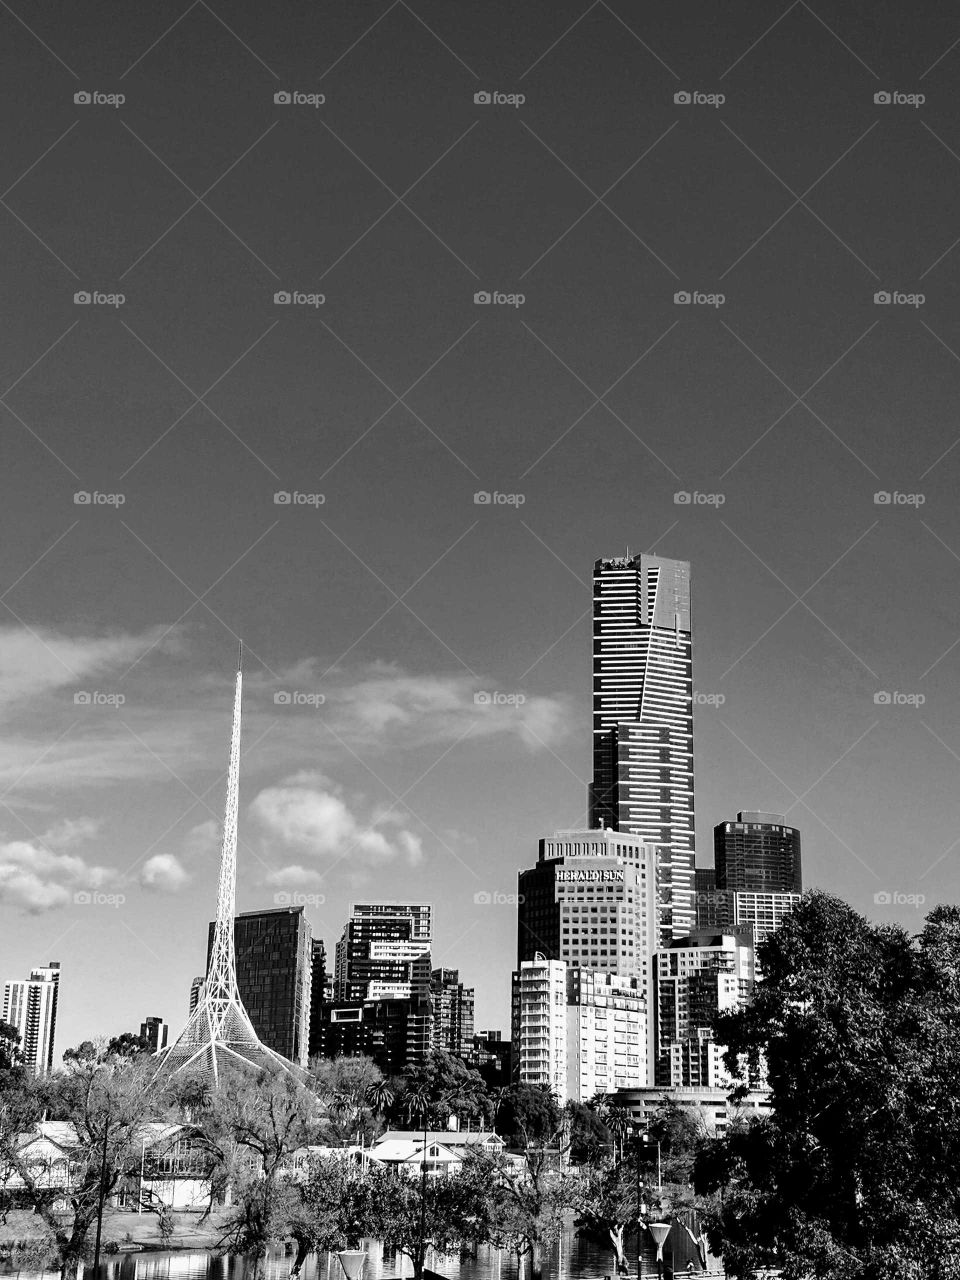 Urban city landscape by the well known Yarra River in Melbourne featuring the art gallery spire